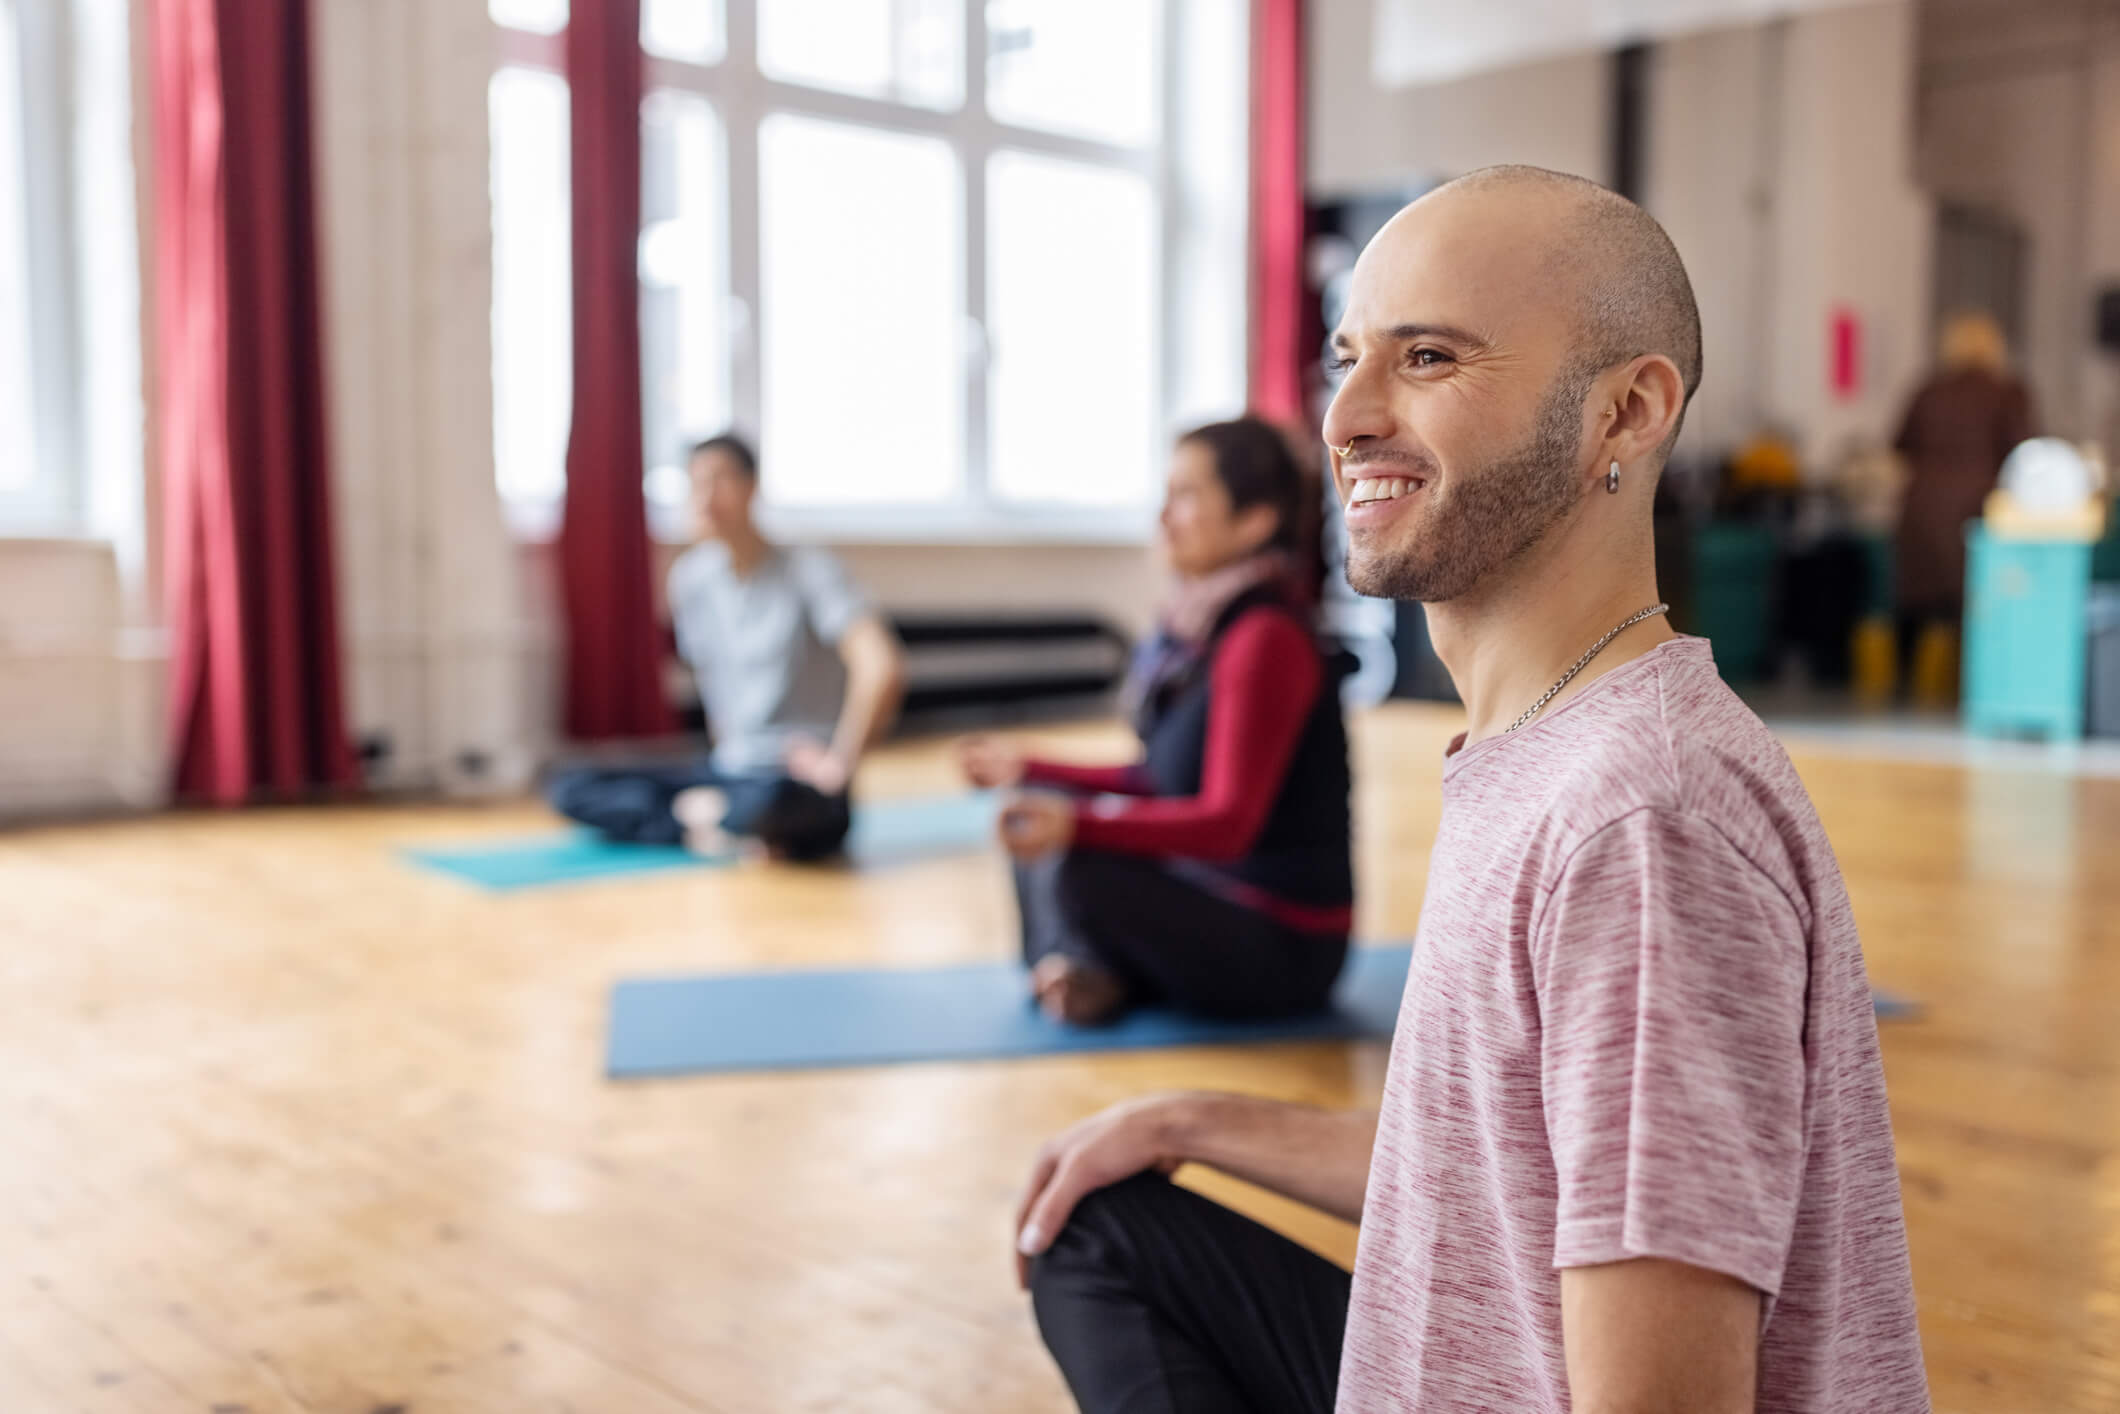 A man is sitting on a yoga mat in a class of other students sitting on yoga mats; he is looking to the side and smiling.